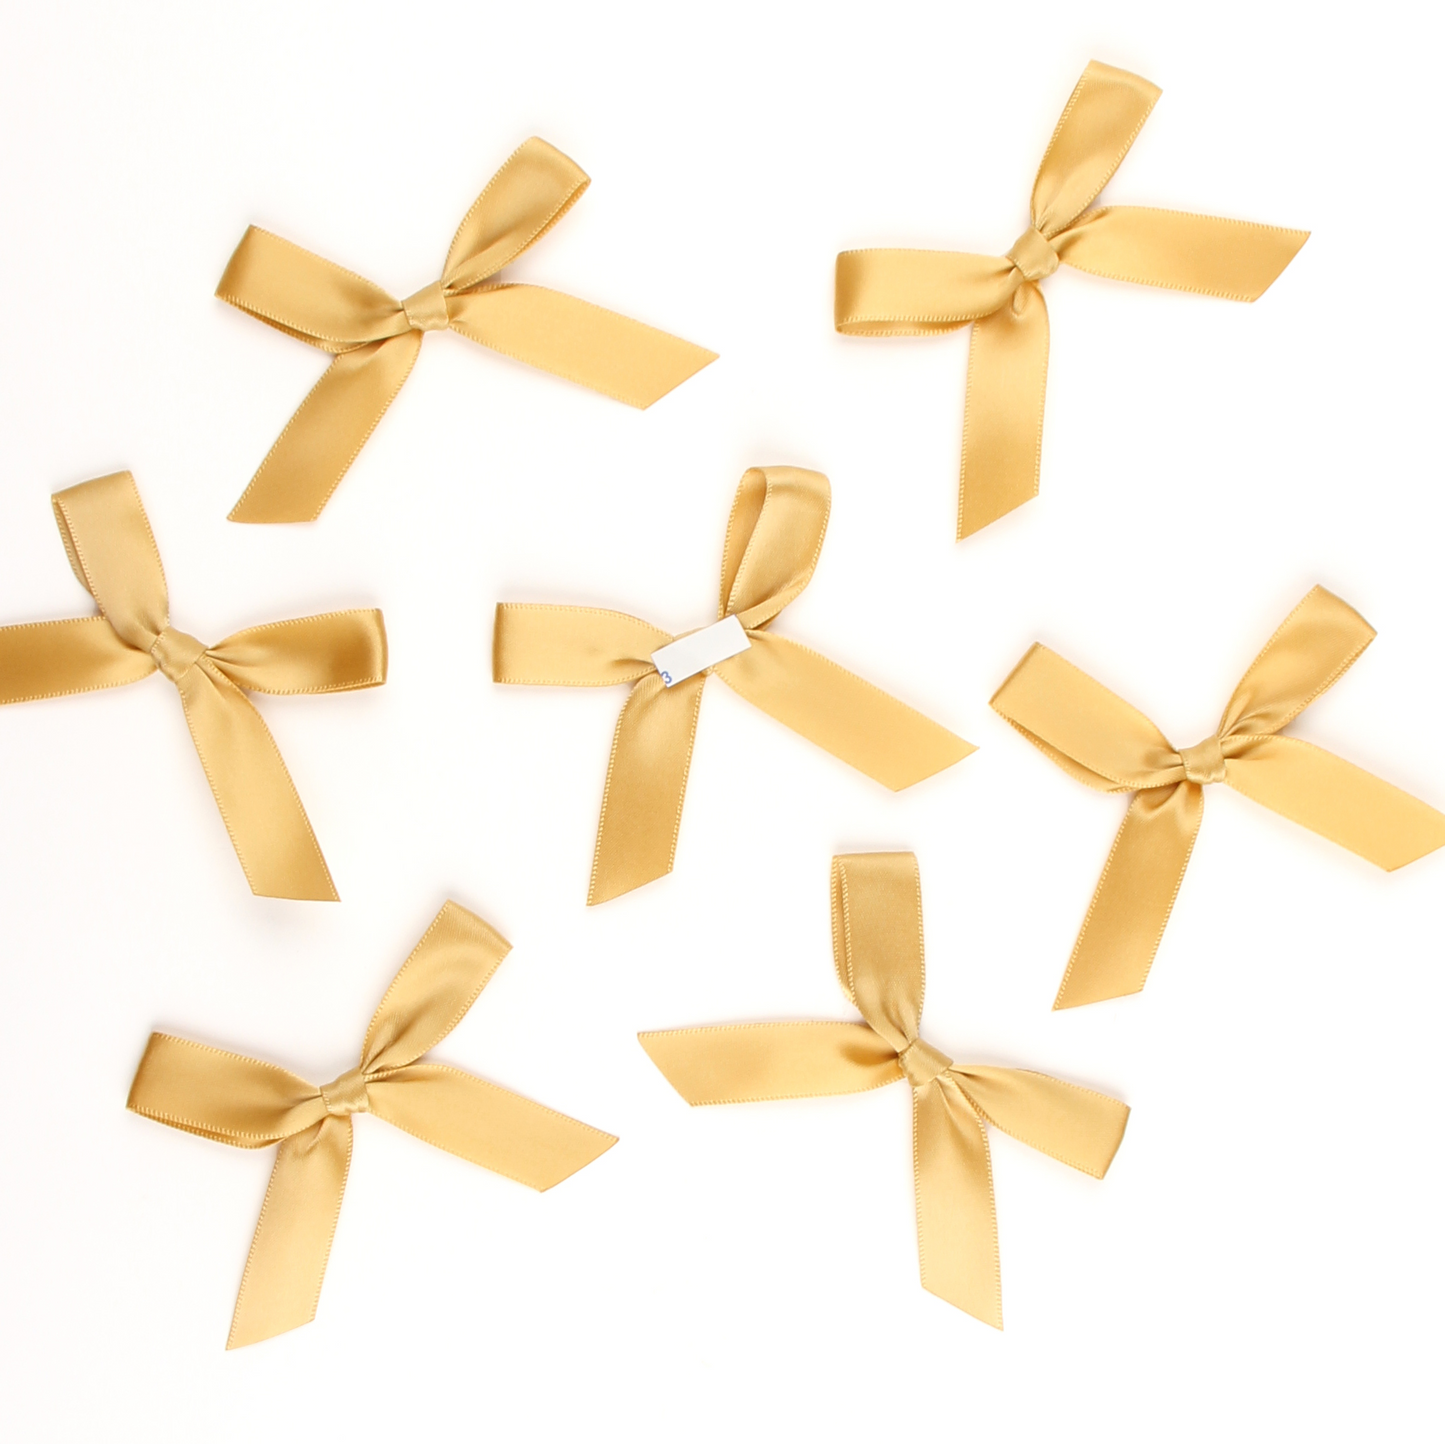 Multiple gold satin pre-tied bows by Lux Party, showing peel and stick backing.